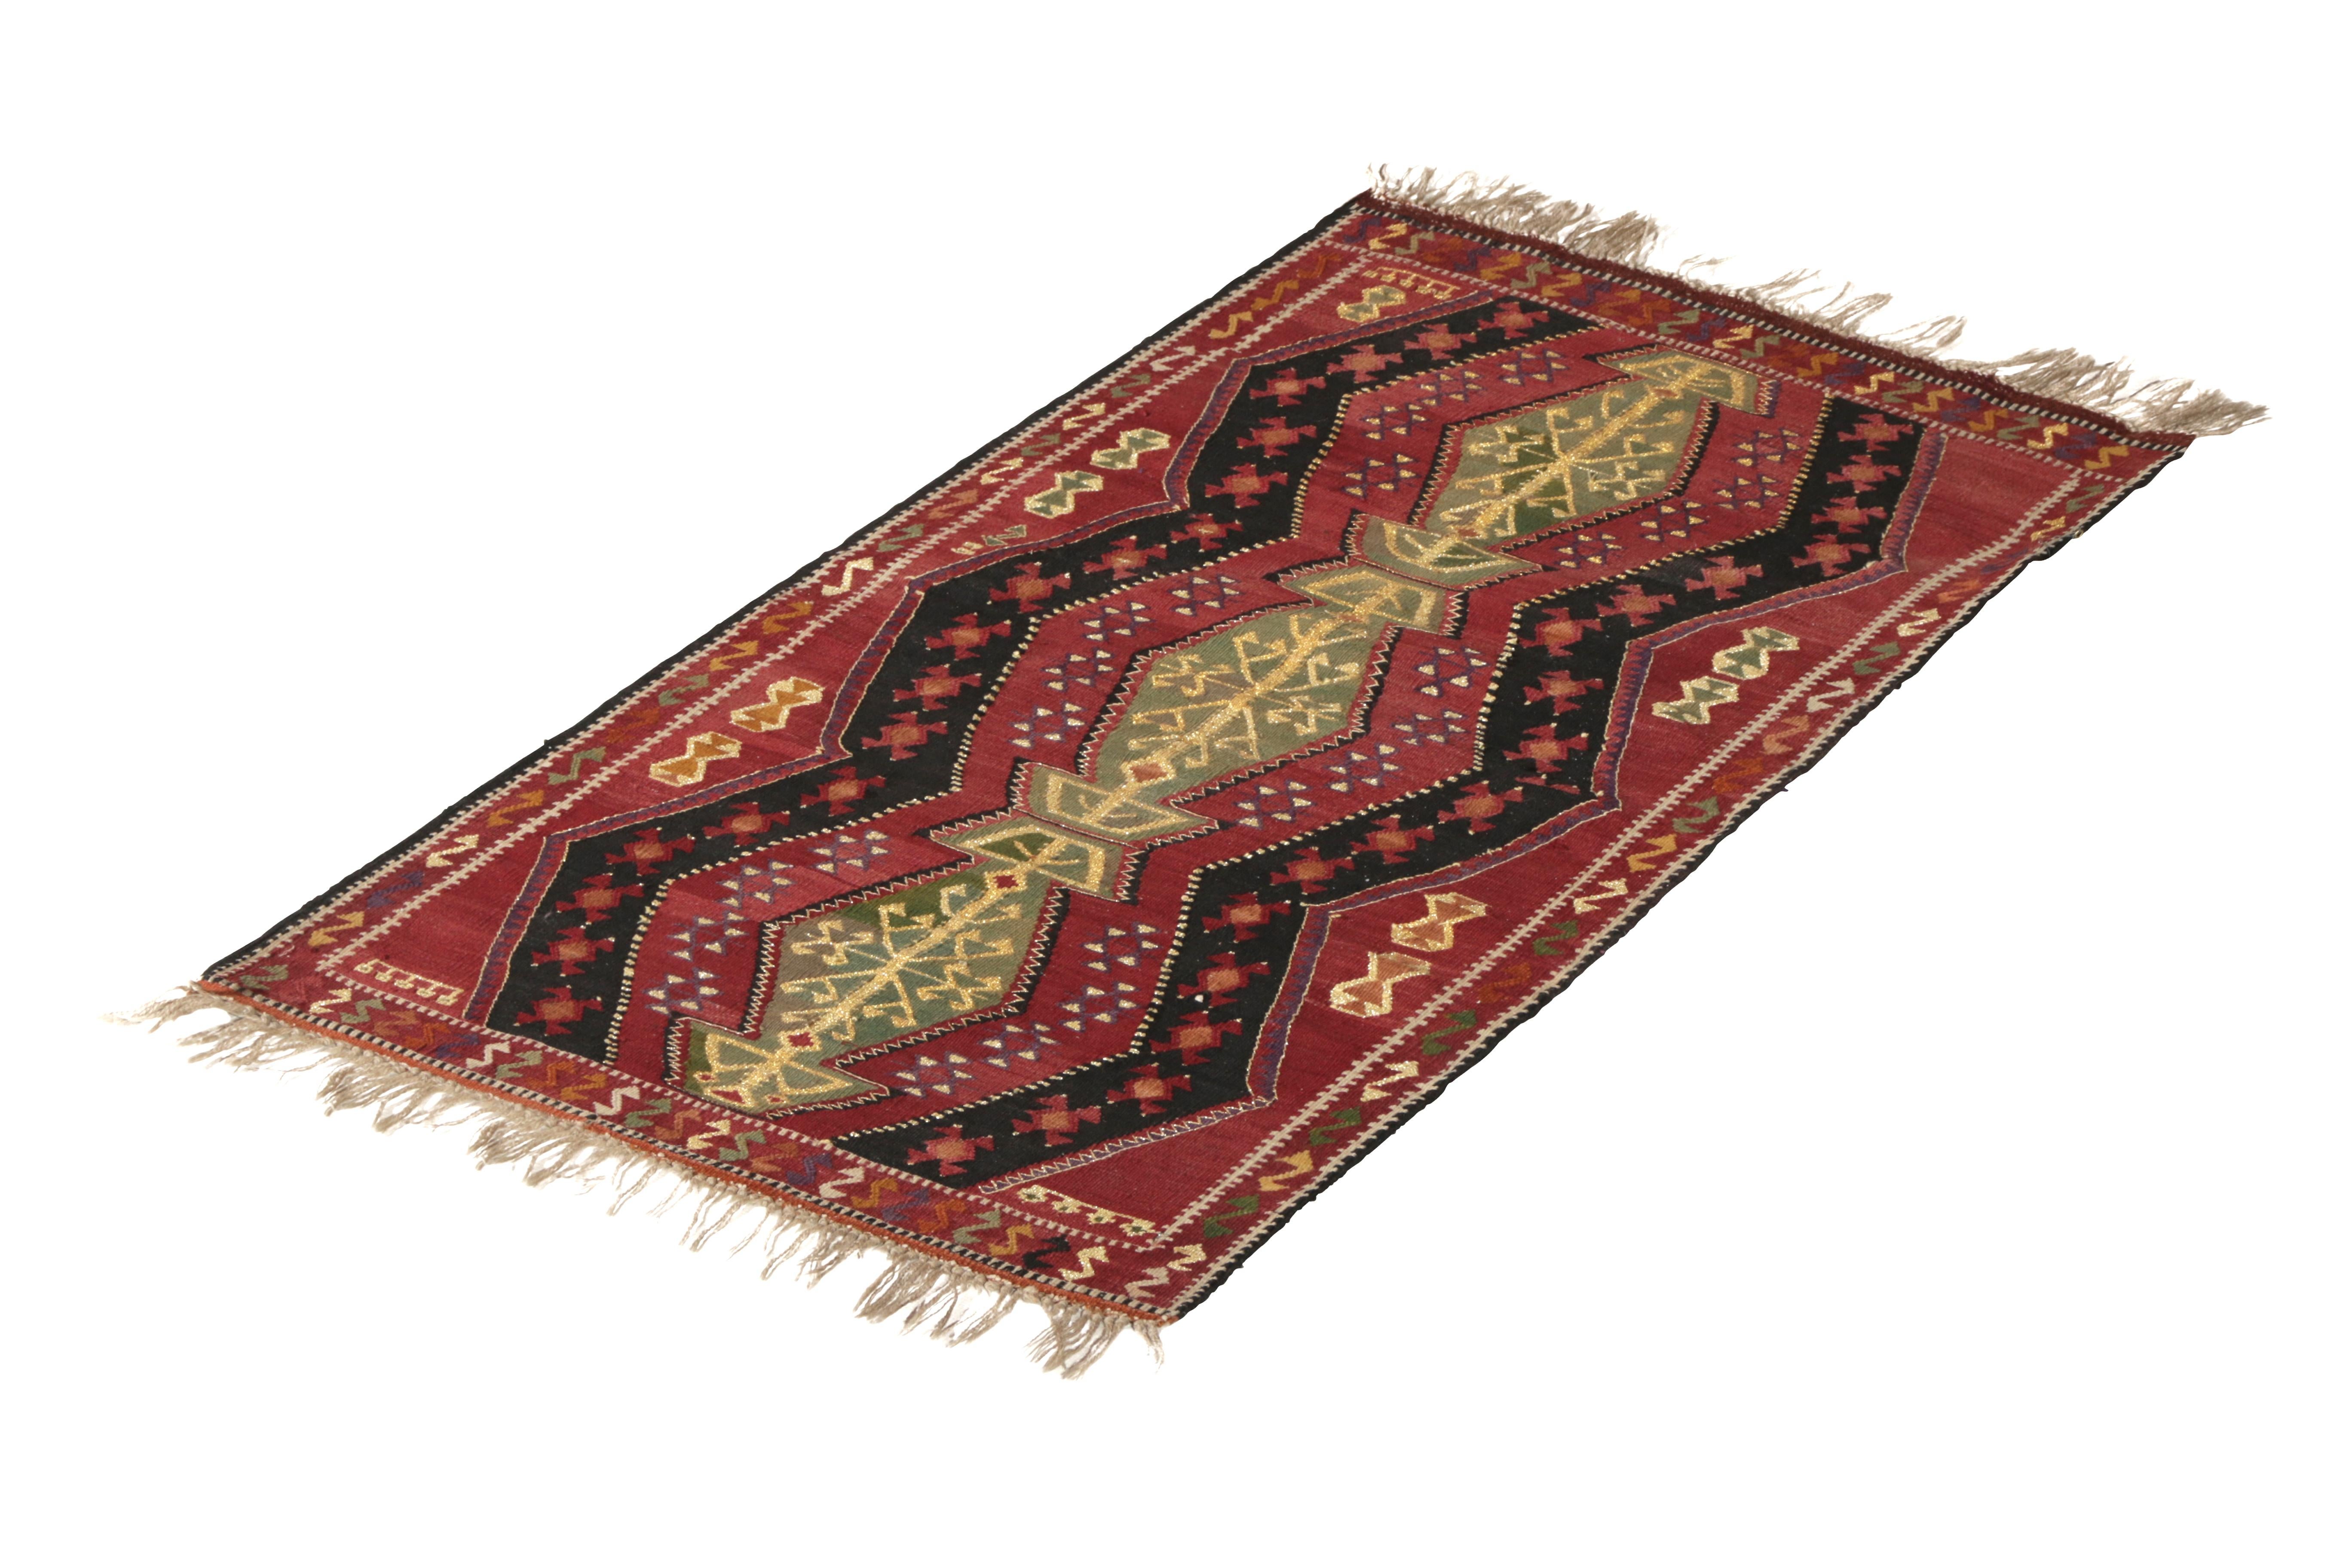 Originating from Turkey in 1910, this antique traditional wool Kilim rug features a variety of both celebratory and protective magical symbols from antiquity. Flat-woven in durable wool, the shook symbols of the wrapping border represent the tools